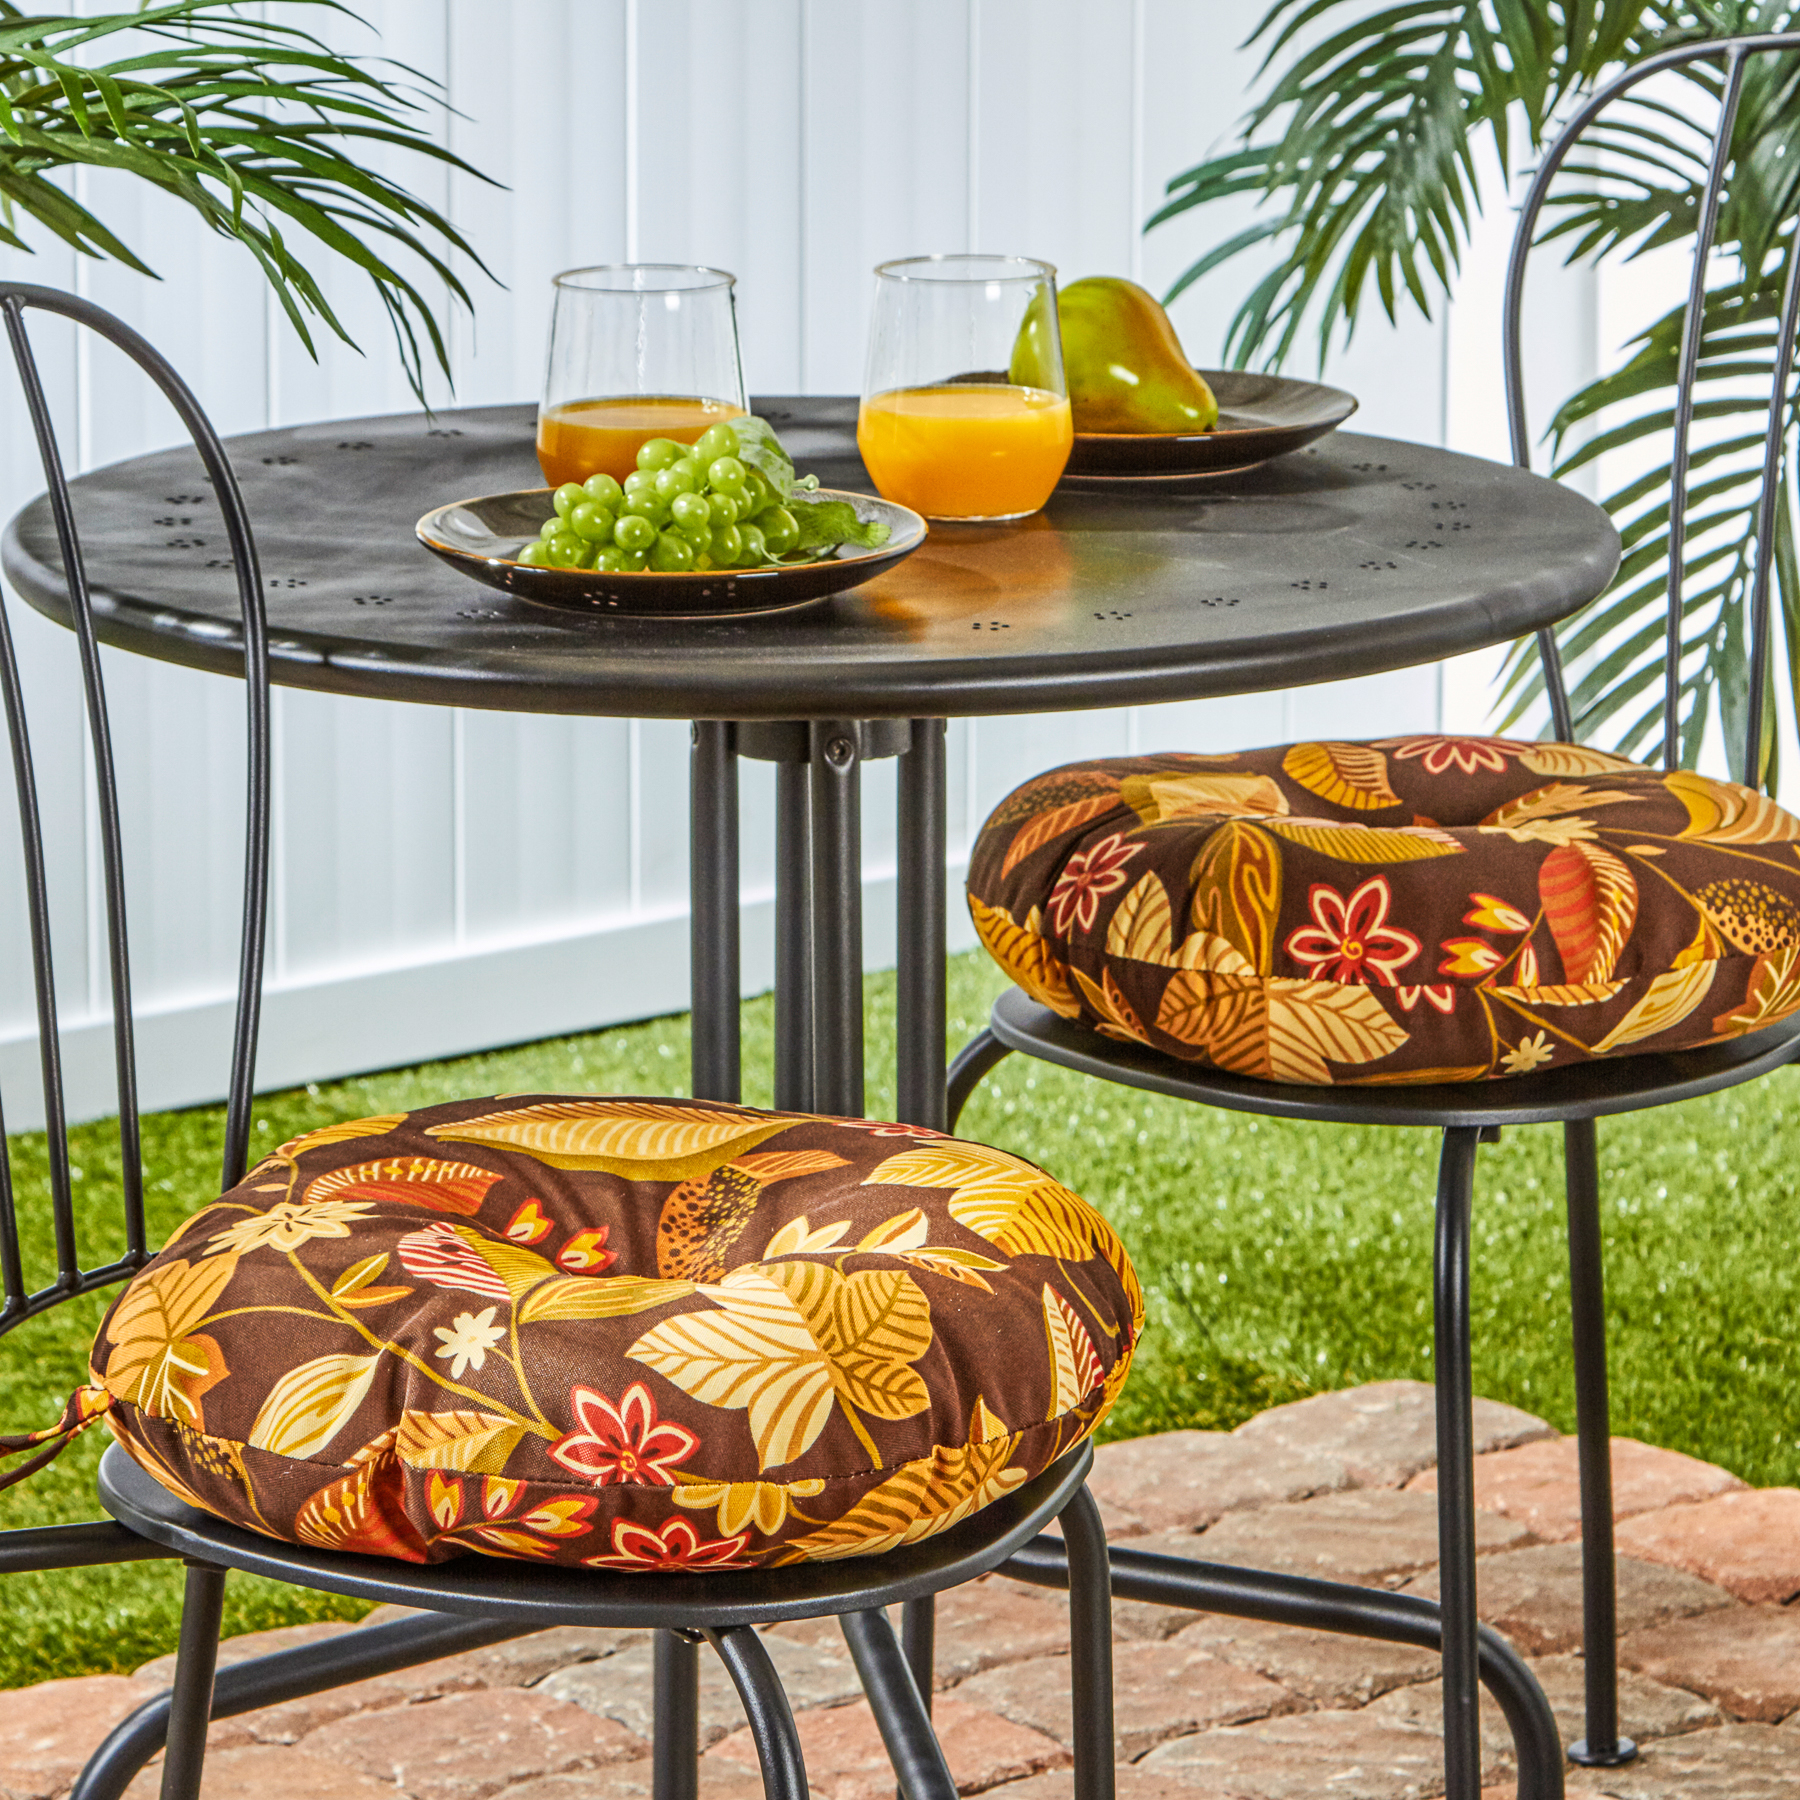 Greendale Home Fashions Timberland Floral 15 in. Round Outdoor Reversible Bistro Seat Cushion (Set of 2) - image 5 of 7